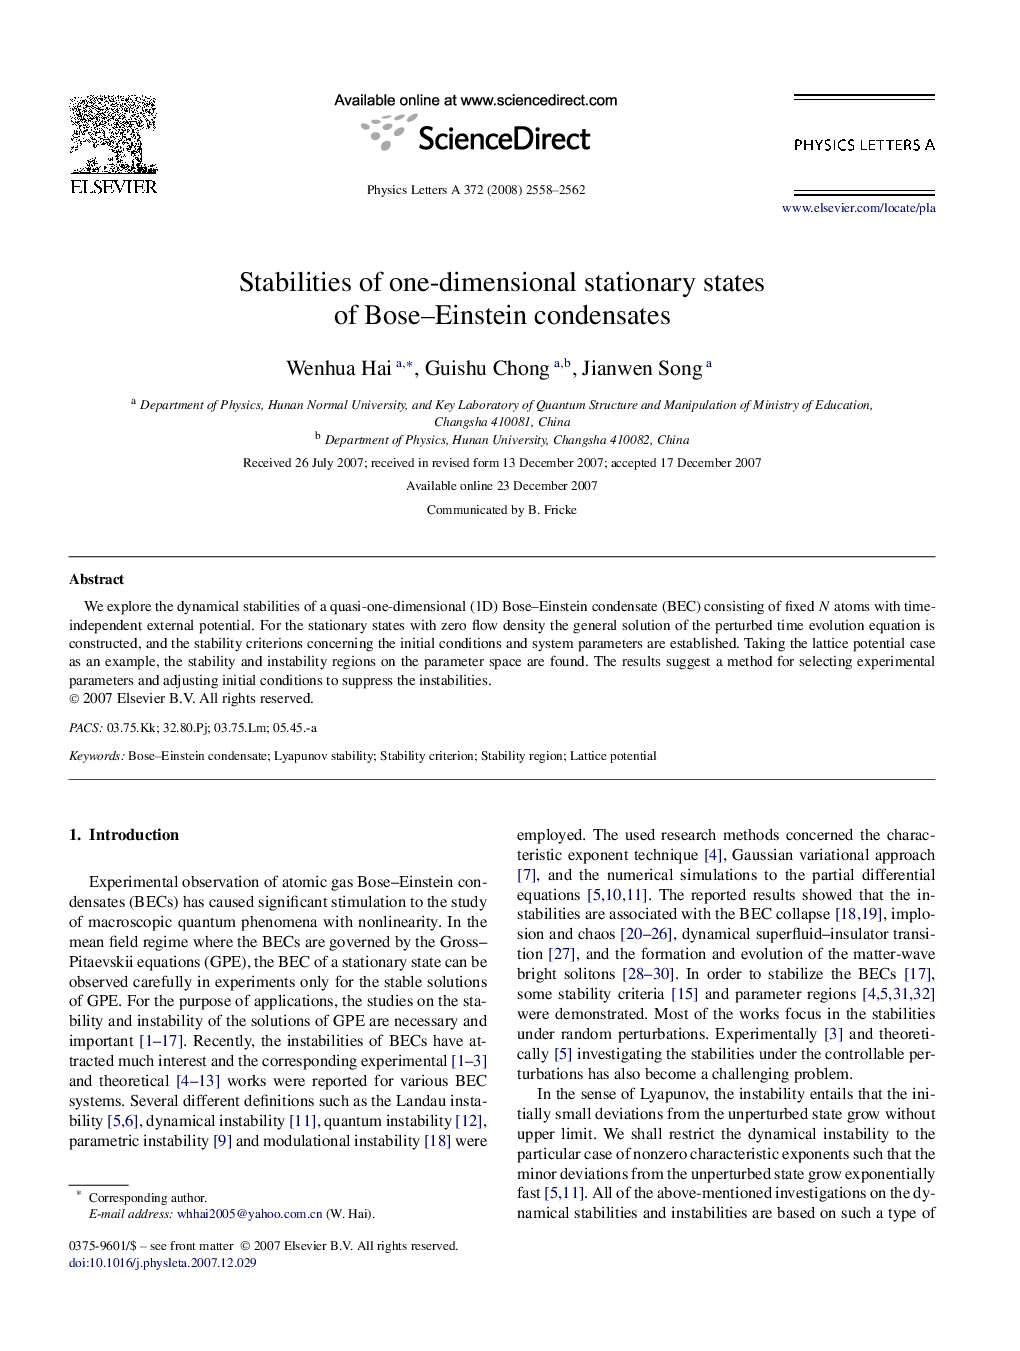 Stabilities of one-dimensional stationary states of Bose-Einstein condensates